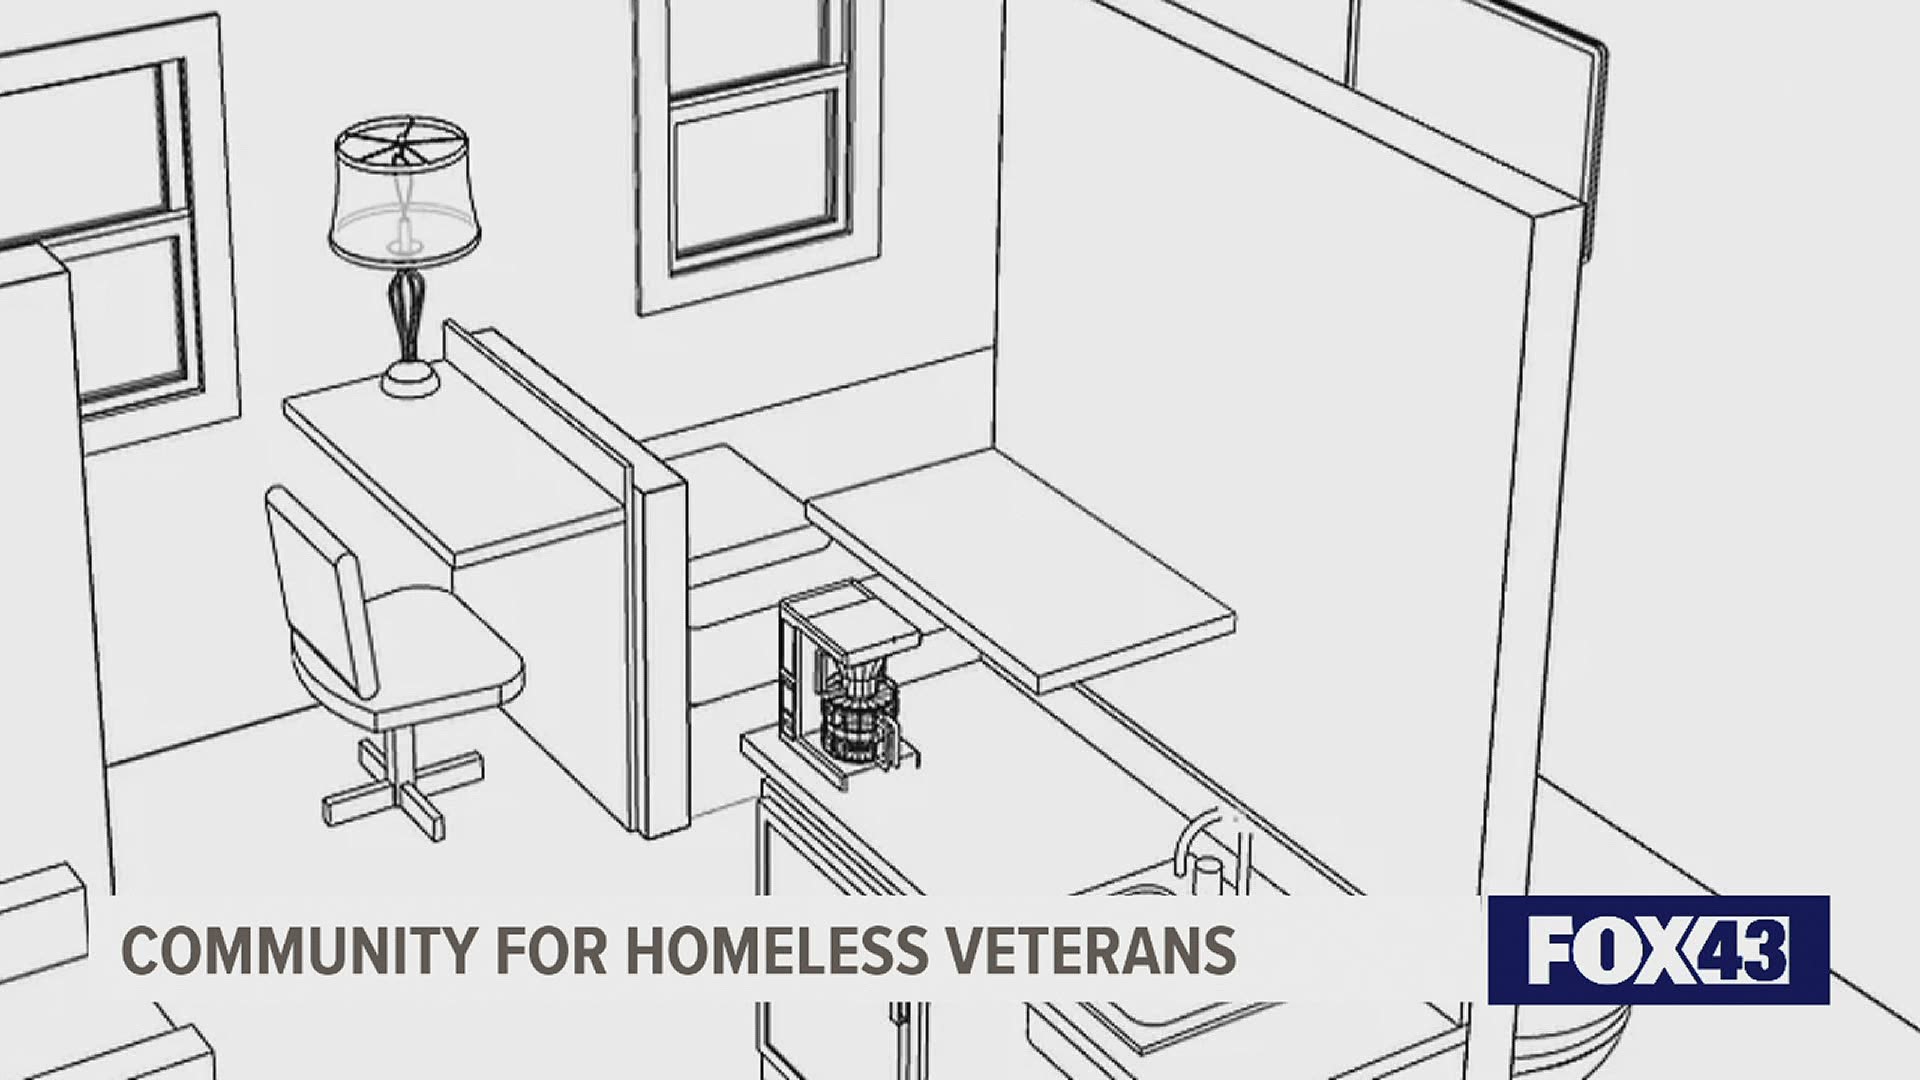 A five acre plot of land along the Susquehanna River in Harrisburg will become a community for the homeless veteran population.